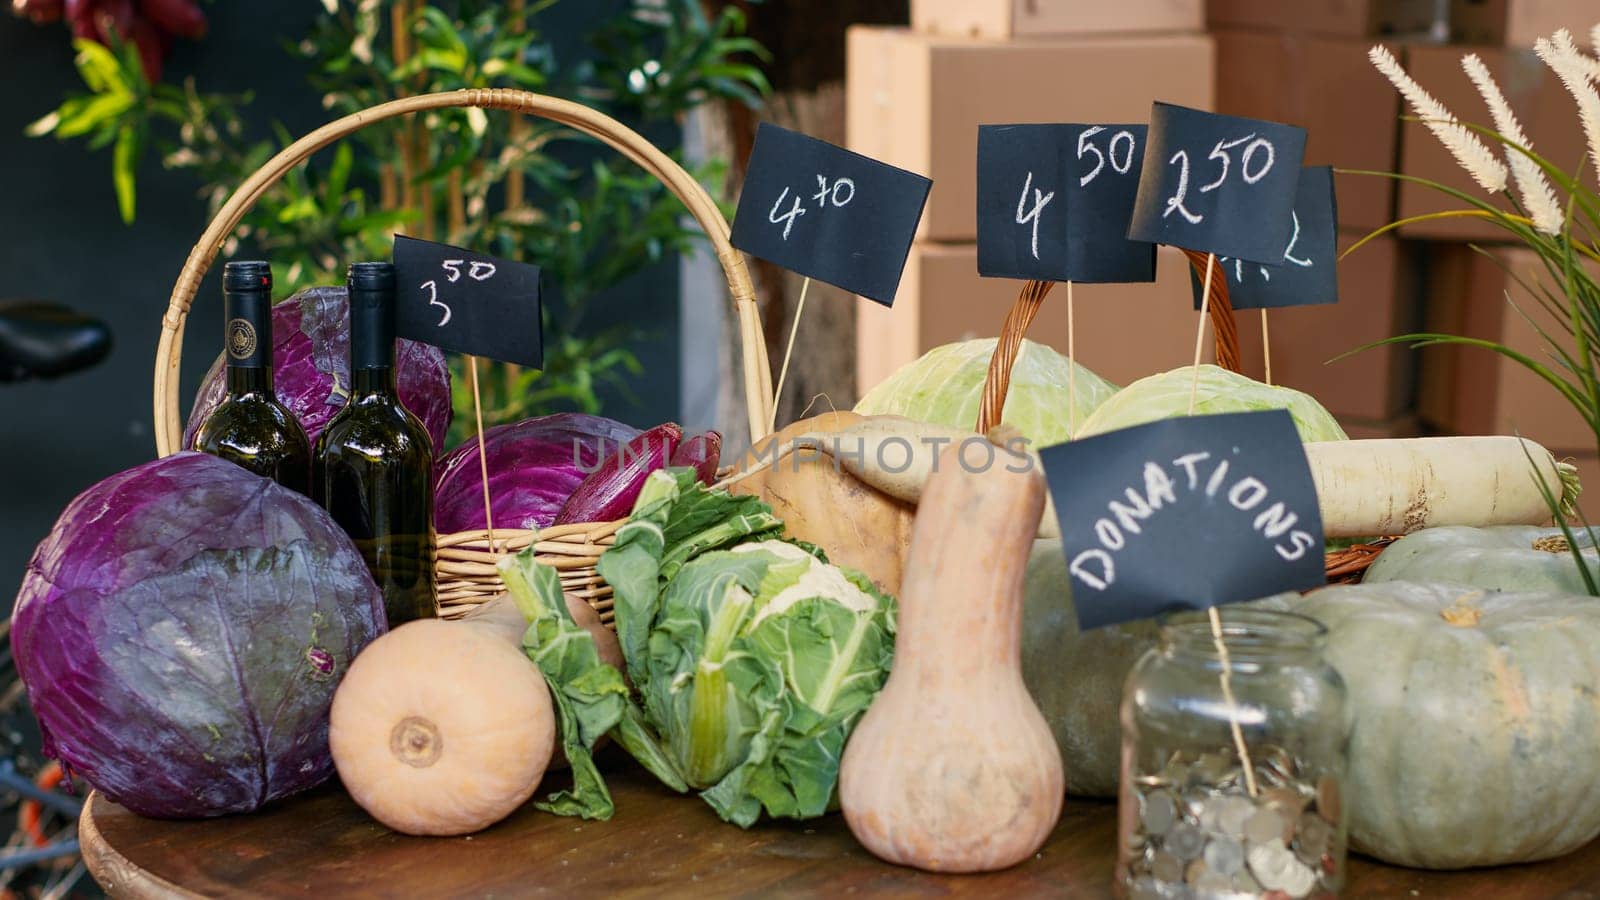 Variety of fresh locally grown lettuce and cabbage next to donations jar by DCStudio